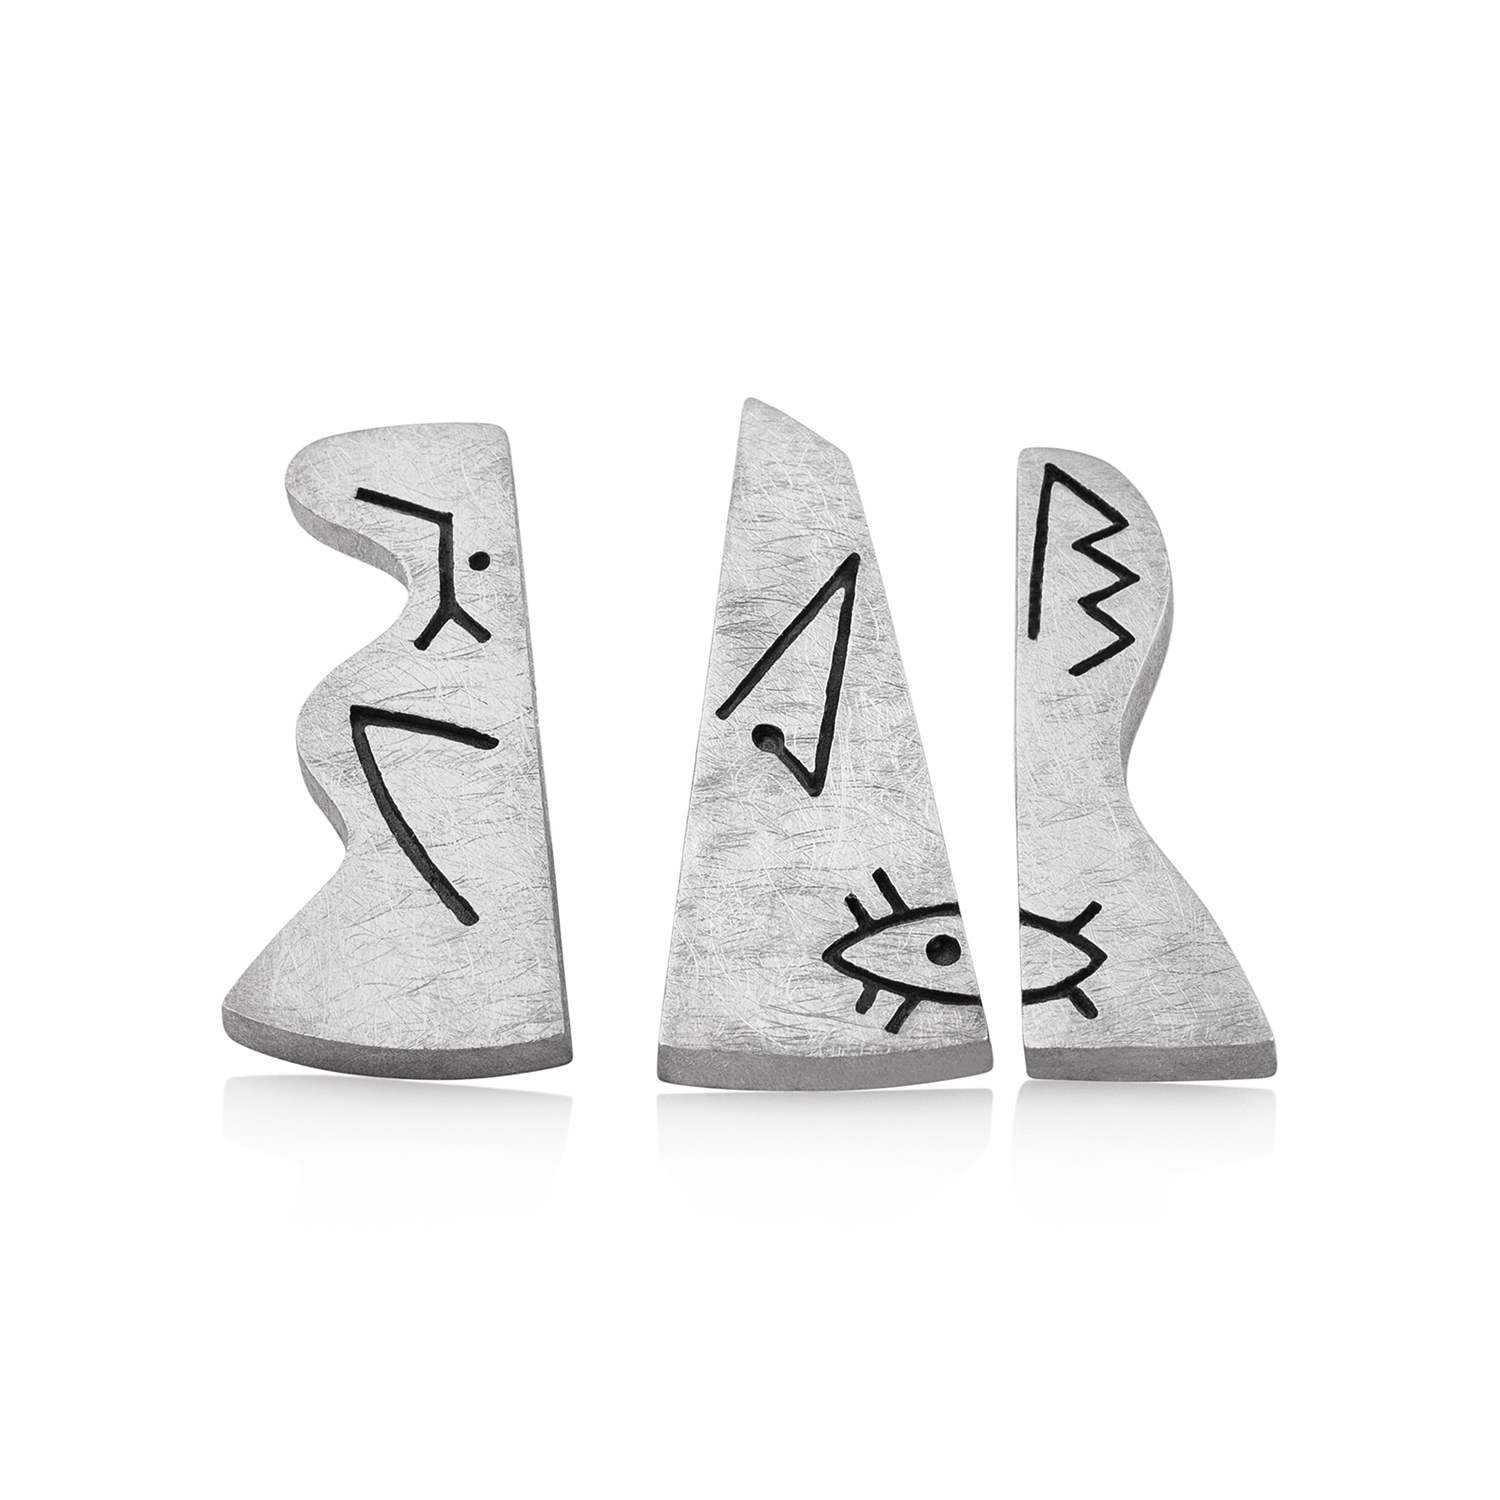 3 pieces Cubism earrings